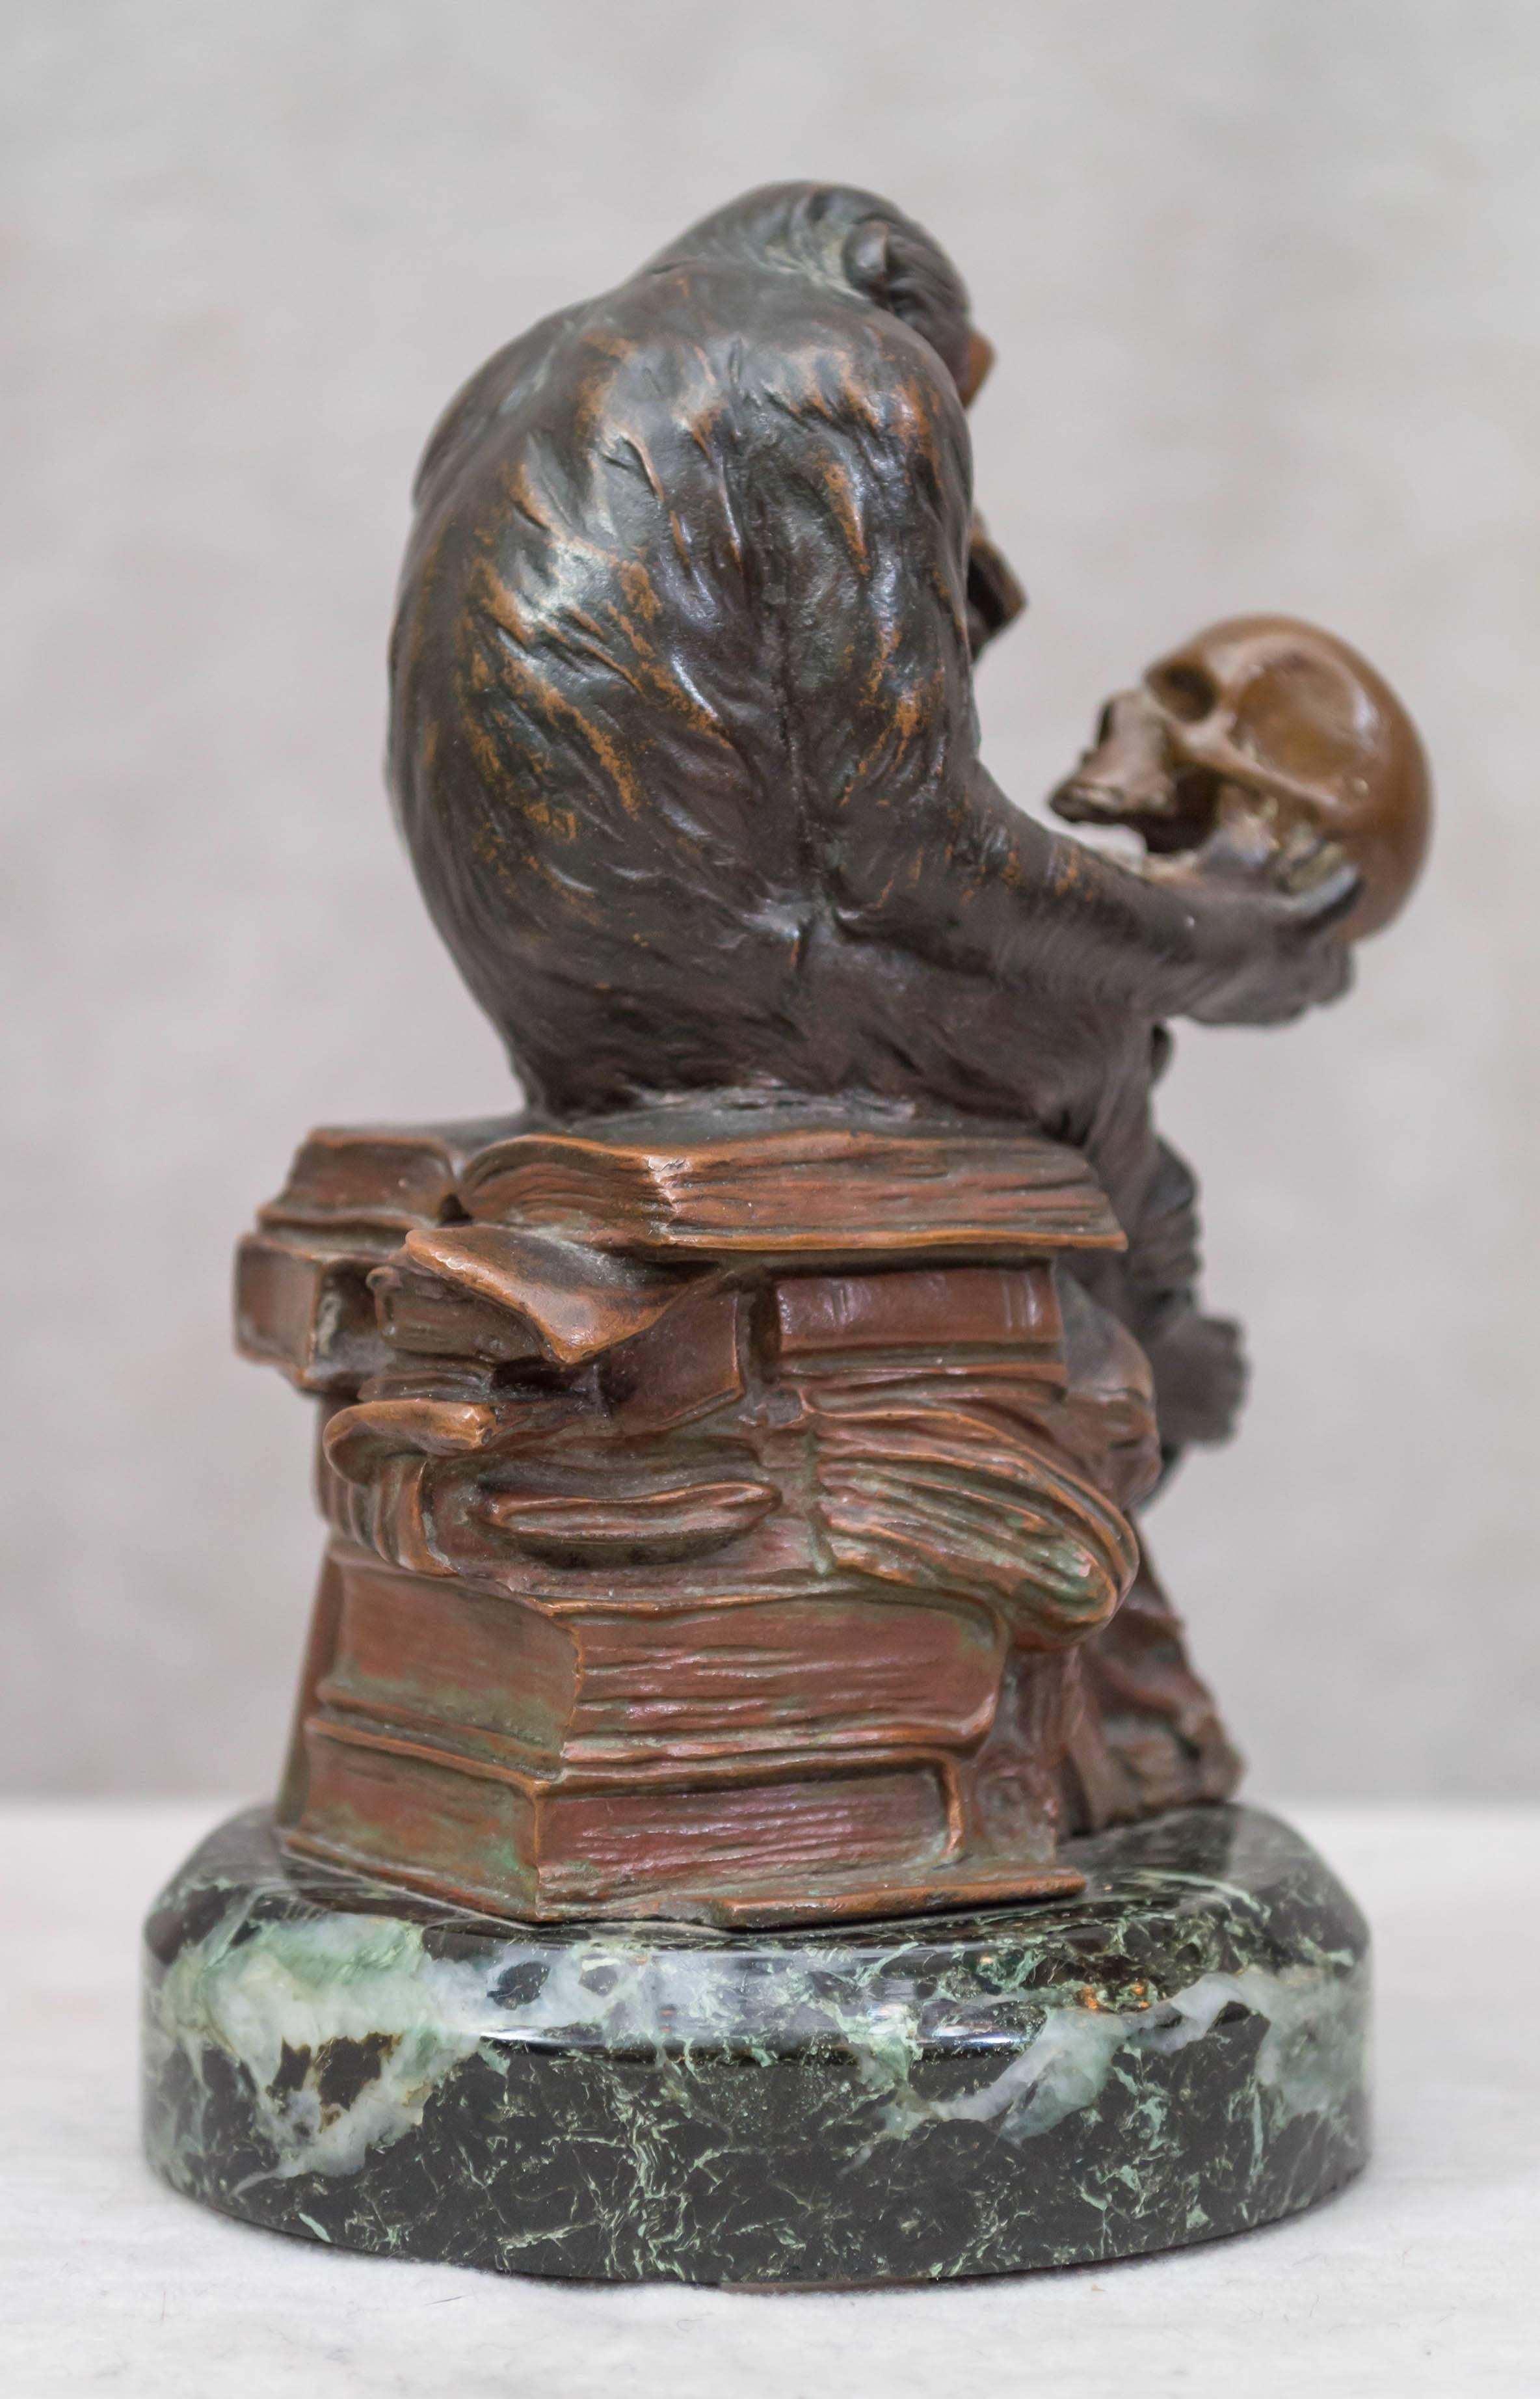 Beaux Arts Whimsical Bronze Figure of a Monkey Studying a Skull, Darwinian Reference